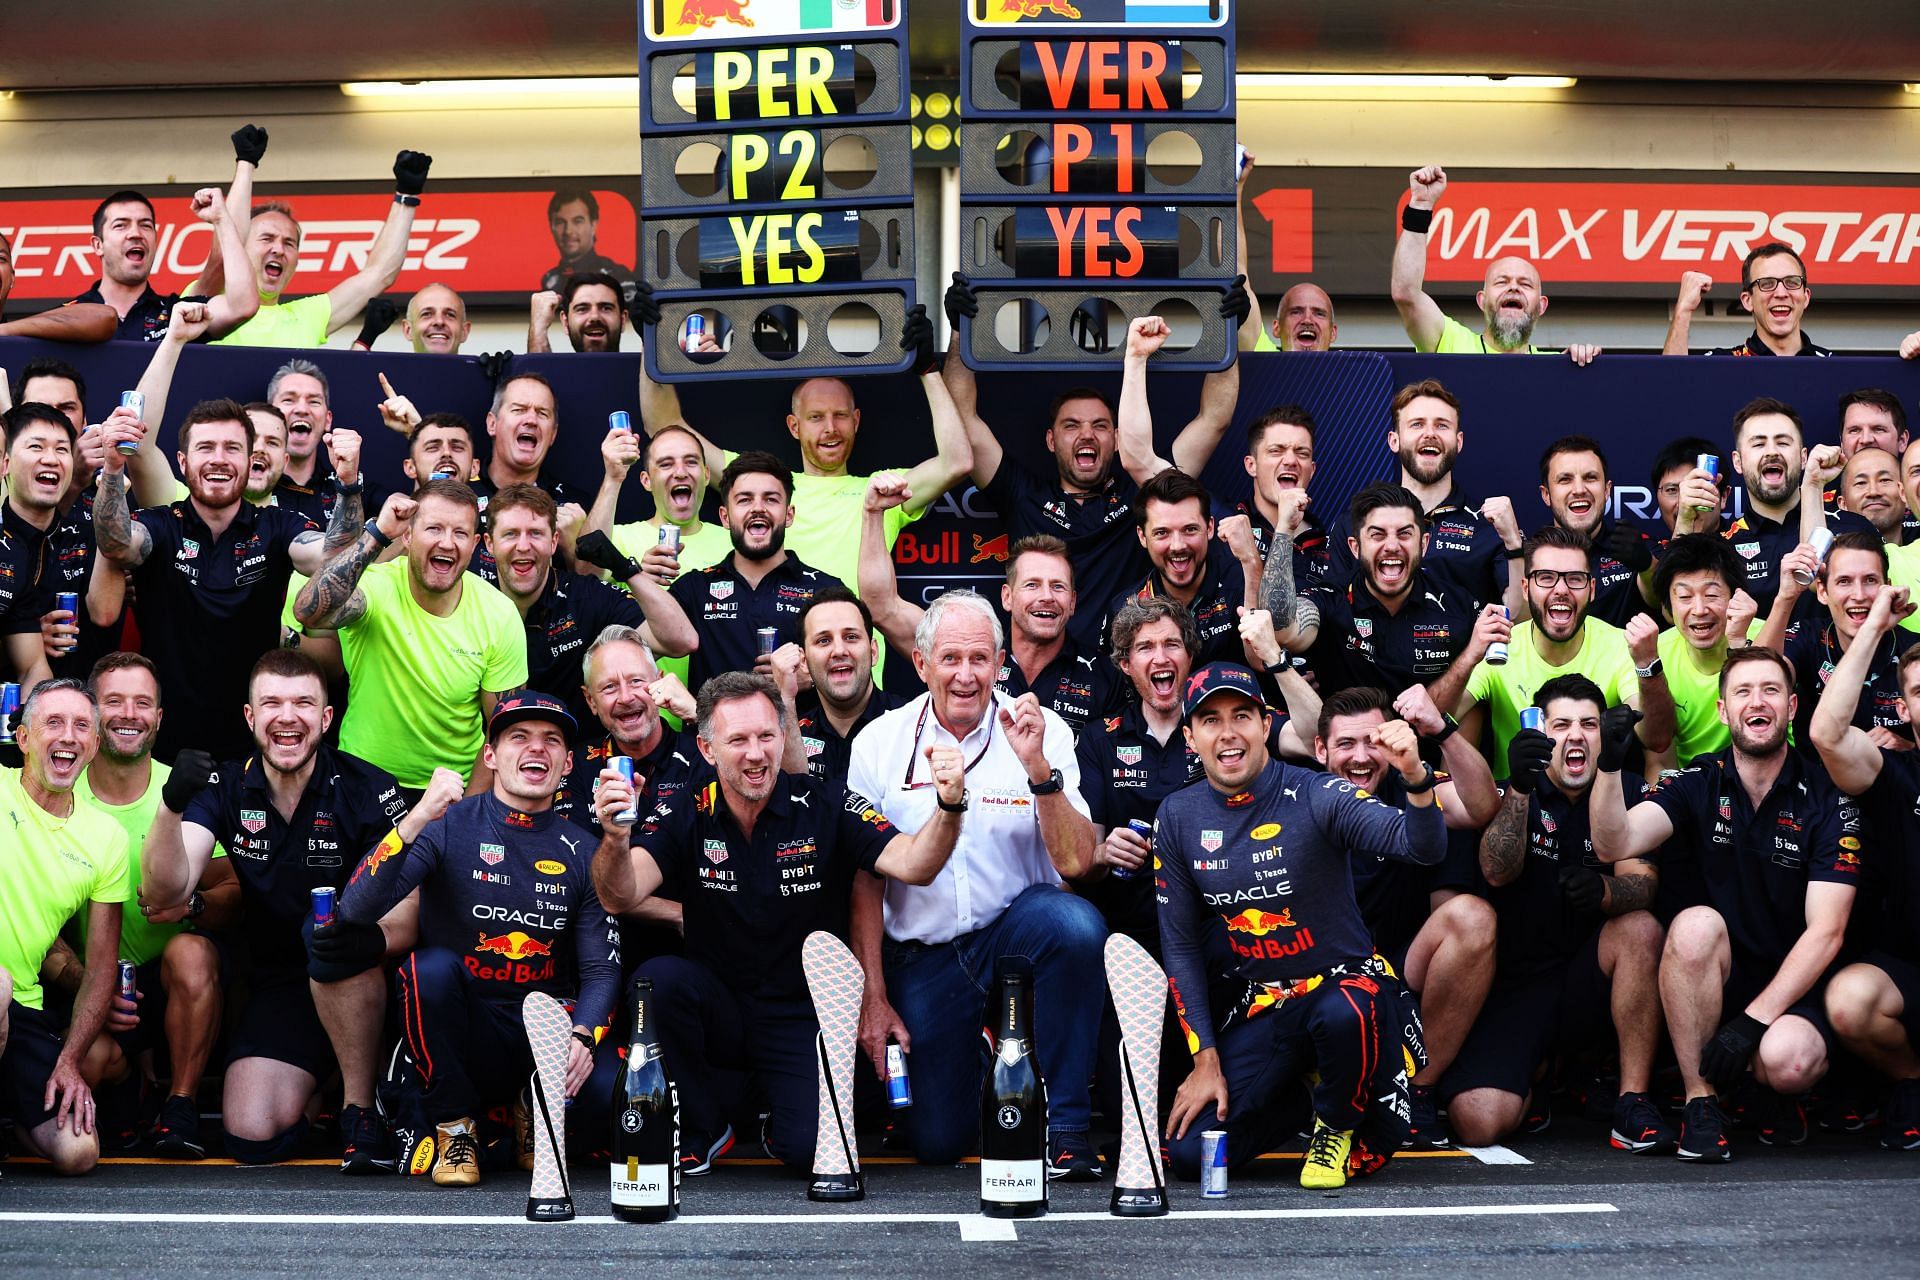 Red Bull secured another 1-2 finish at the Azerbaijan GP